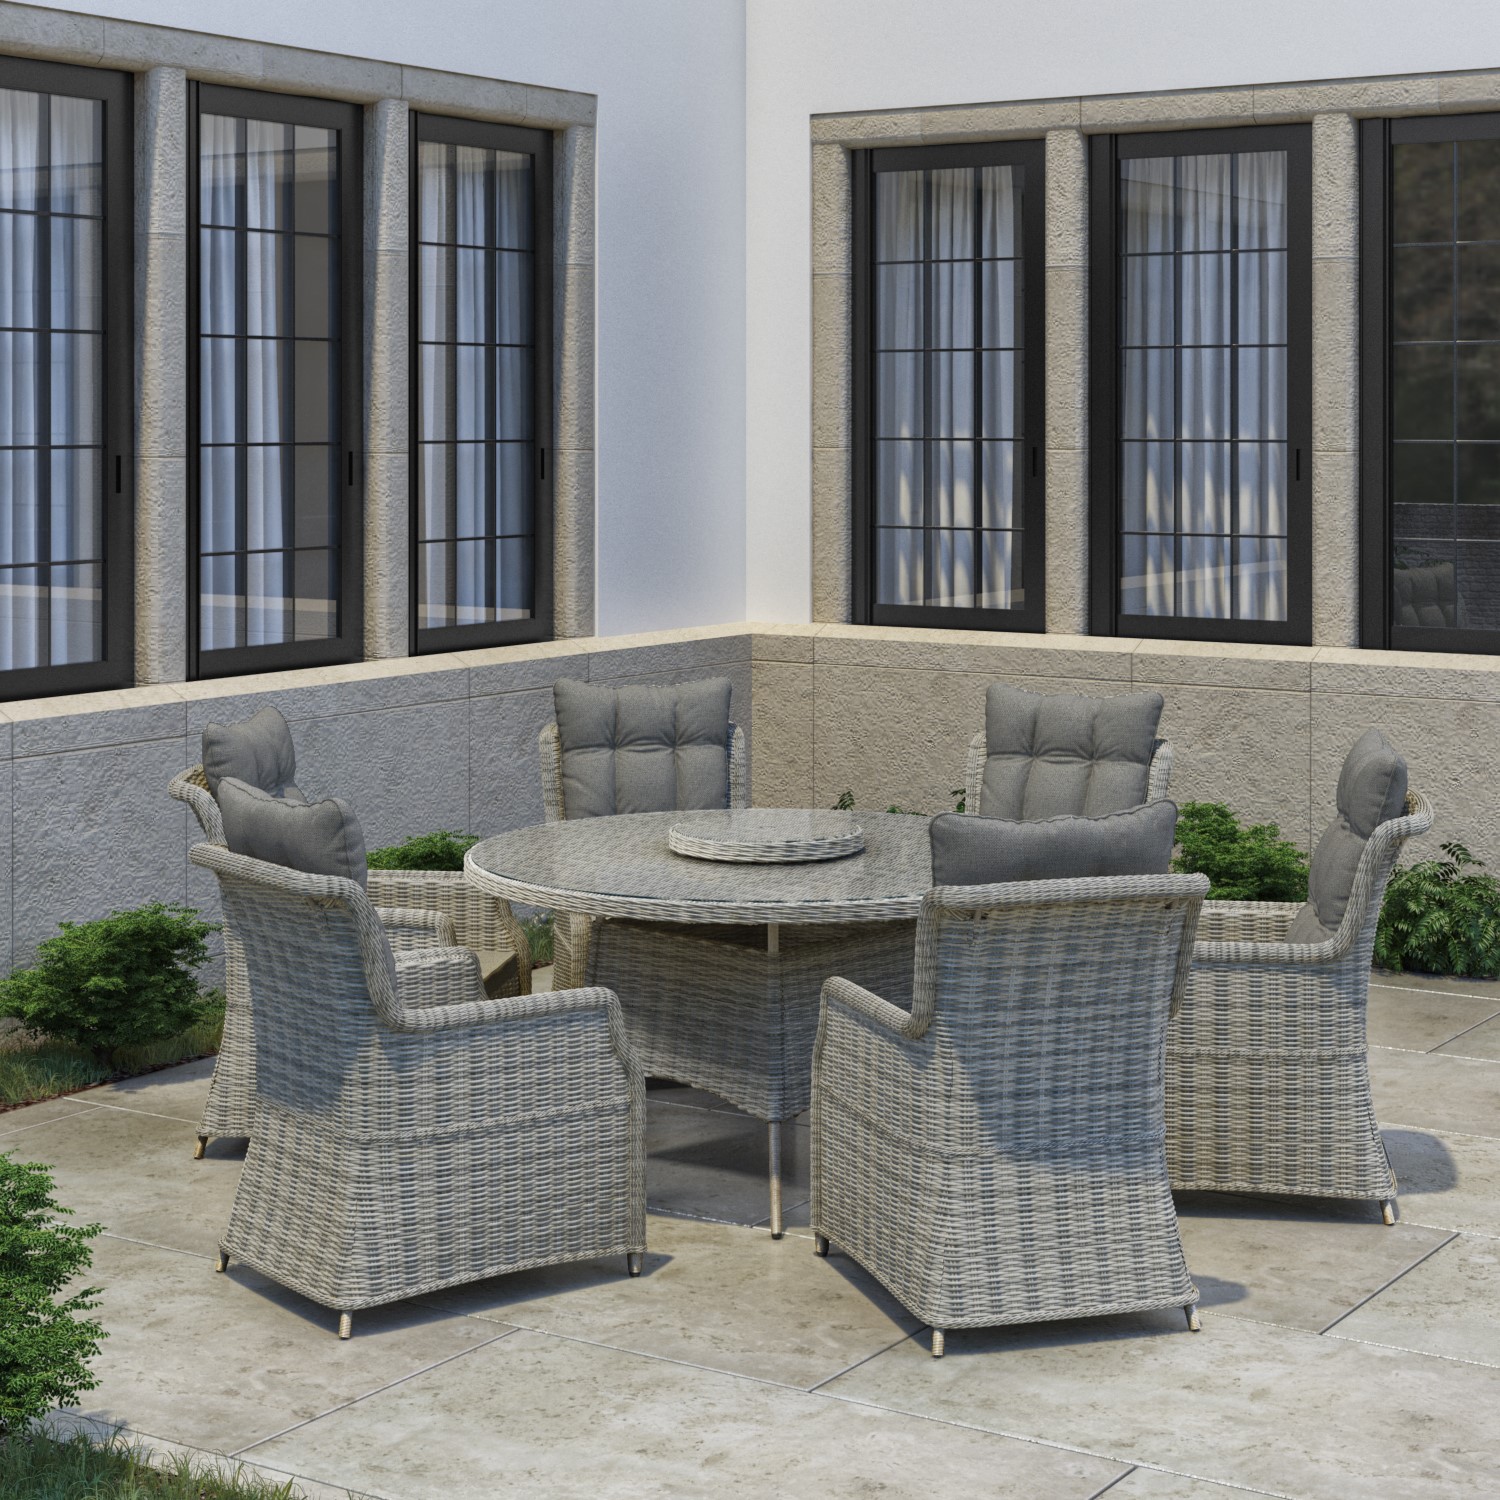 6 Seater Grey Round Rattan Garden, 6 Seater Round Dining Table And Chairs Garden